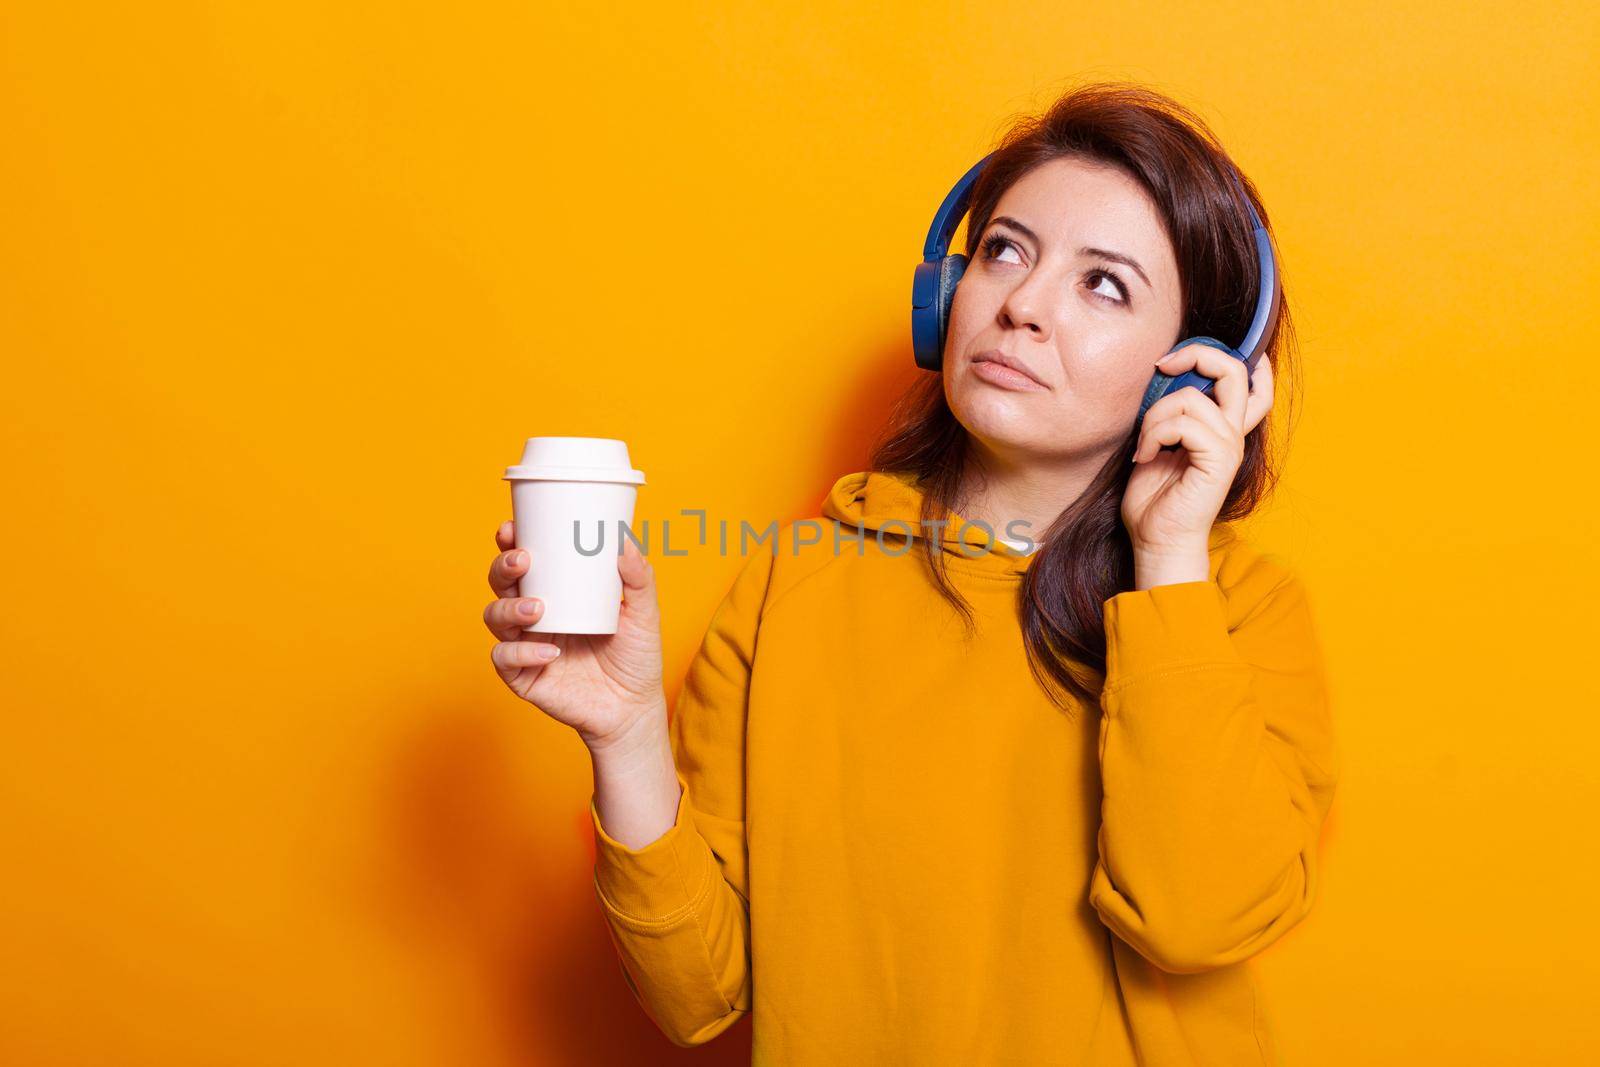 Happy person with cup of coffee listening to music on headset. Caucasian woman feeling relaxed and enjoying song on headphones while holding hot beverage to drink. Young adult relaxing